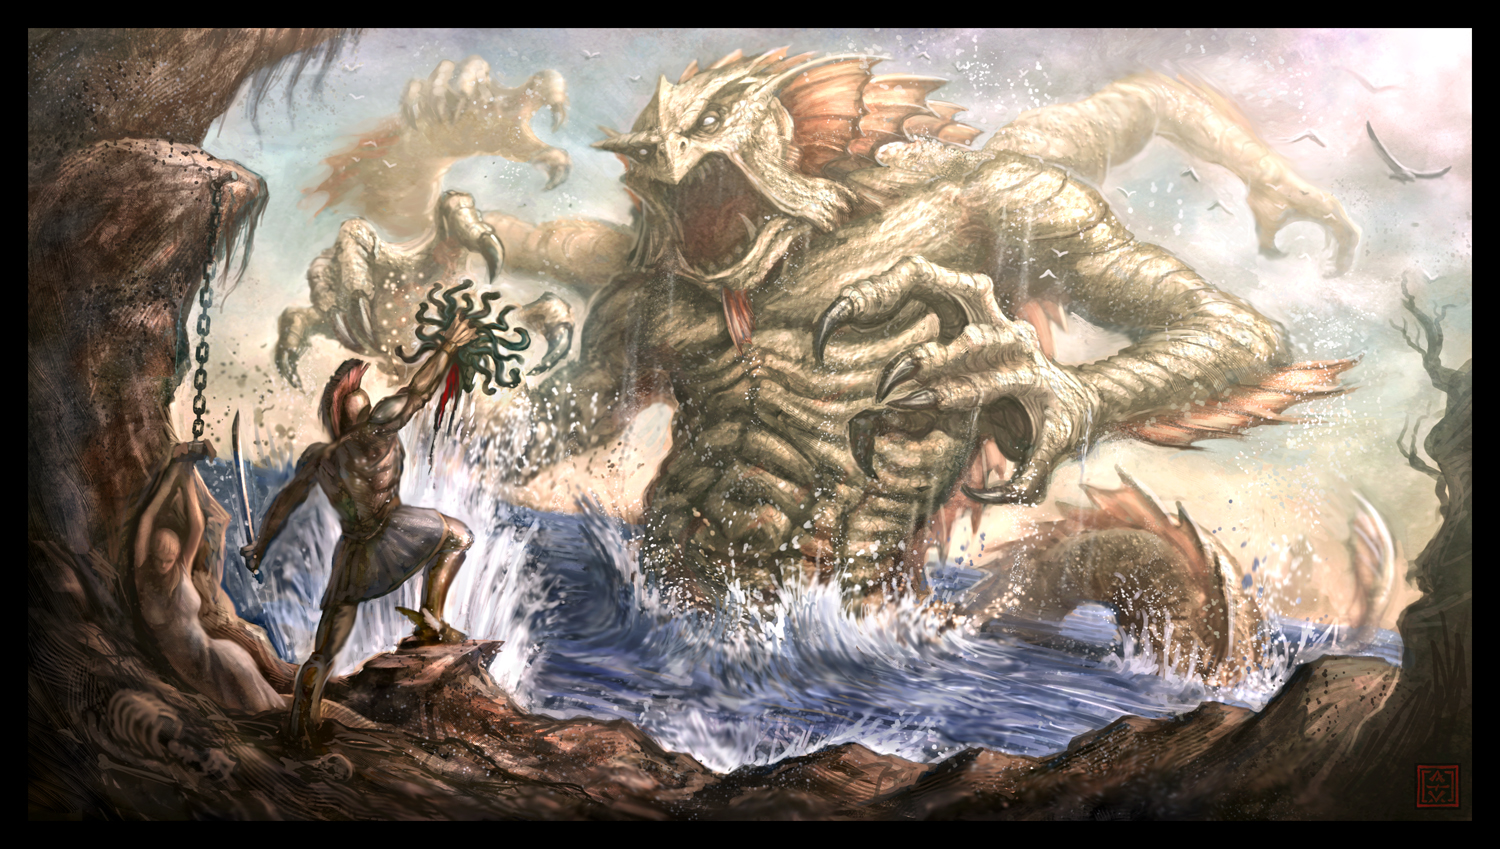 fantasy, medusa, cetus, creature, monster, perseus, sea monster, warrior for android